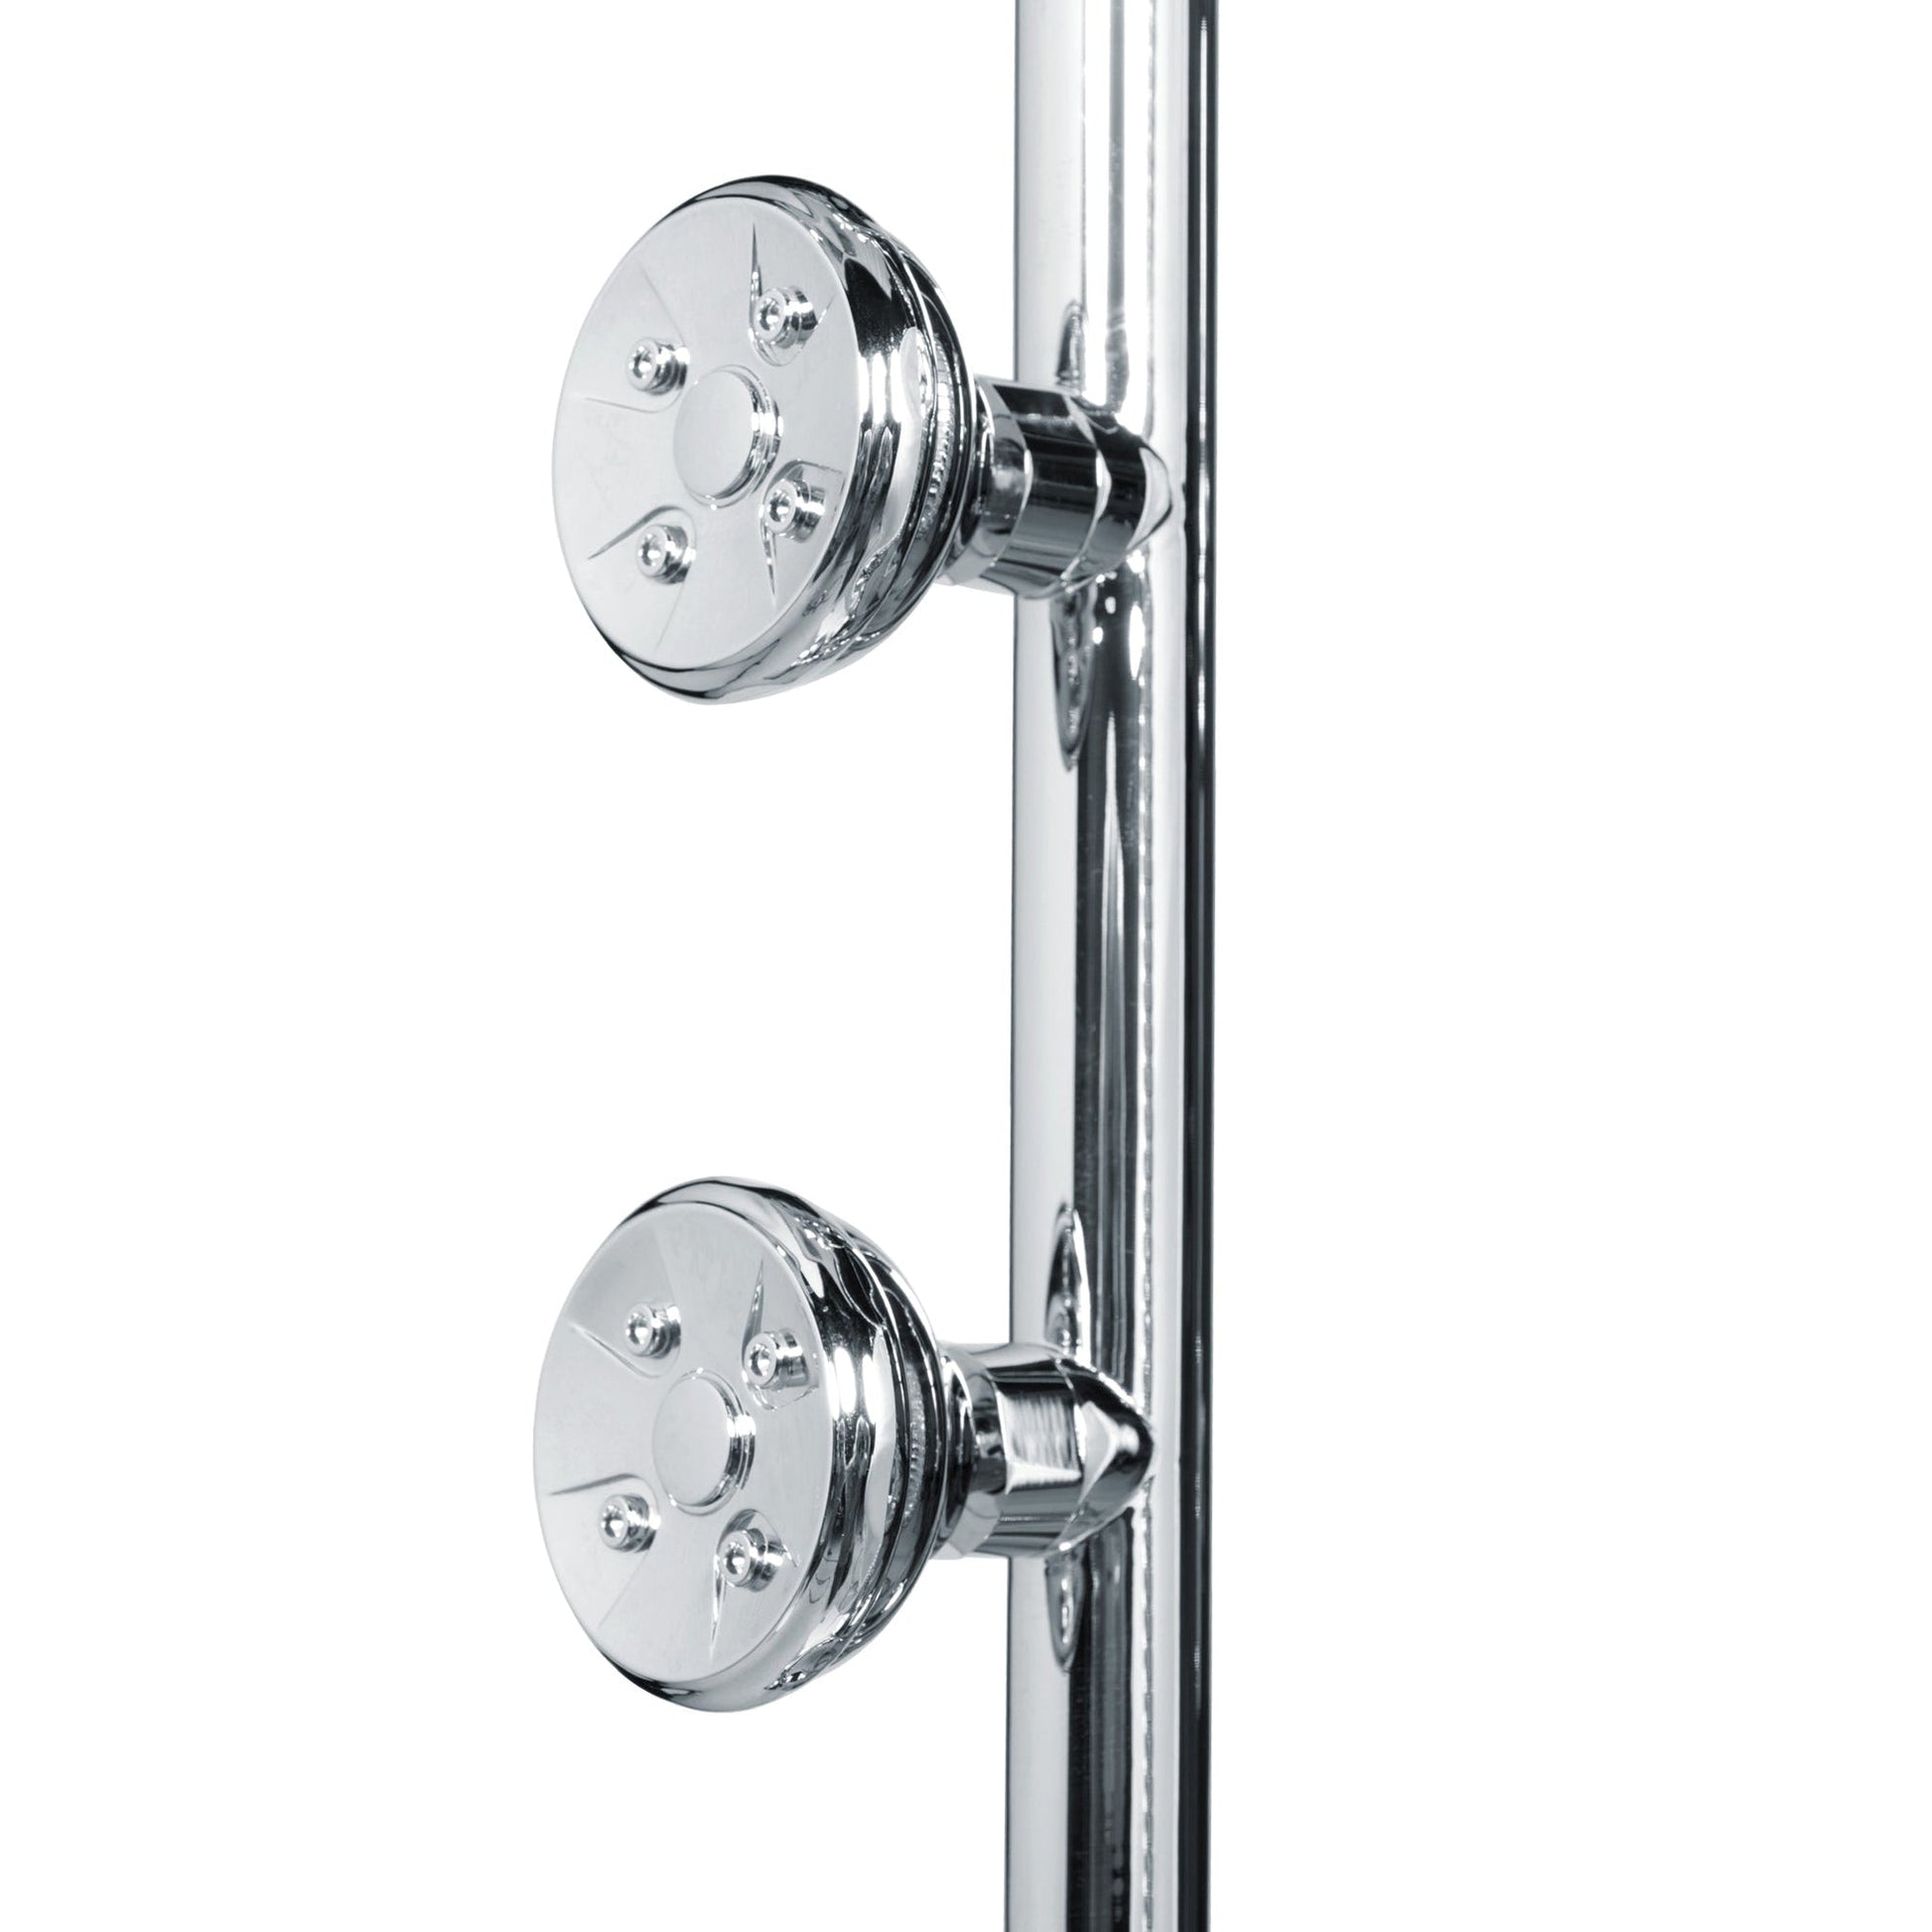 PULSE ShowerSpas Lanai 2.5 GPM Rain Shower System in Chrome Finish With 3-Power Spray Body Jet and 3-Function Hand Shower